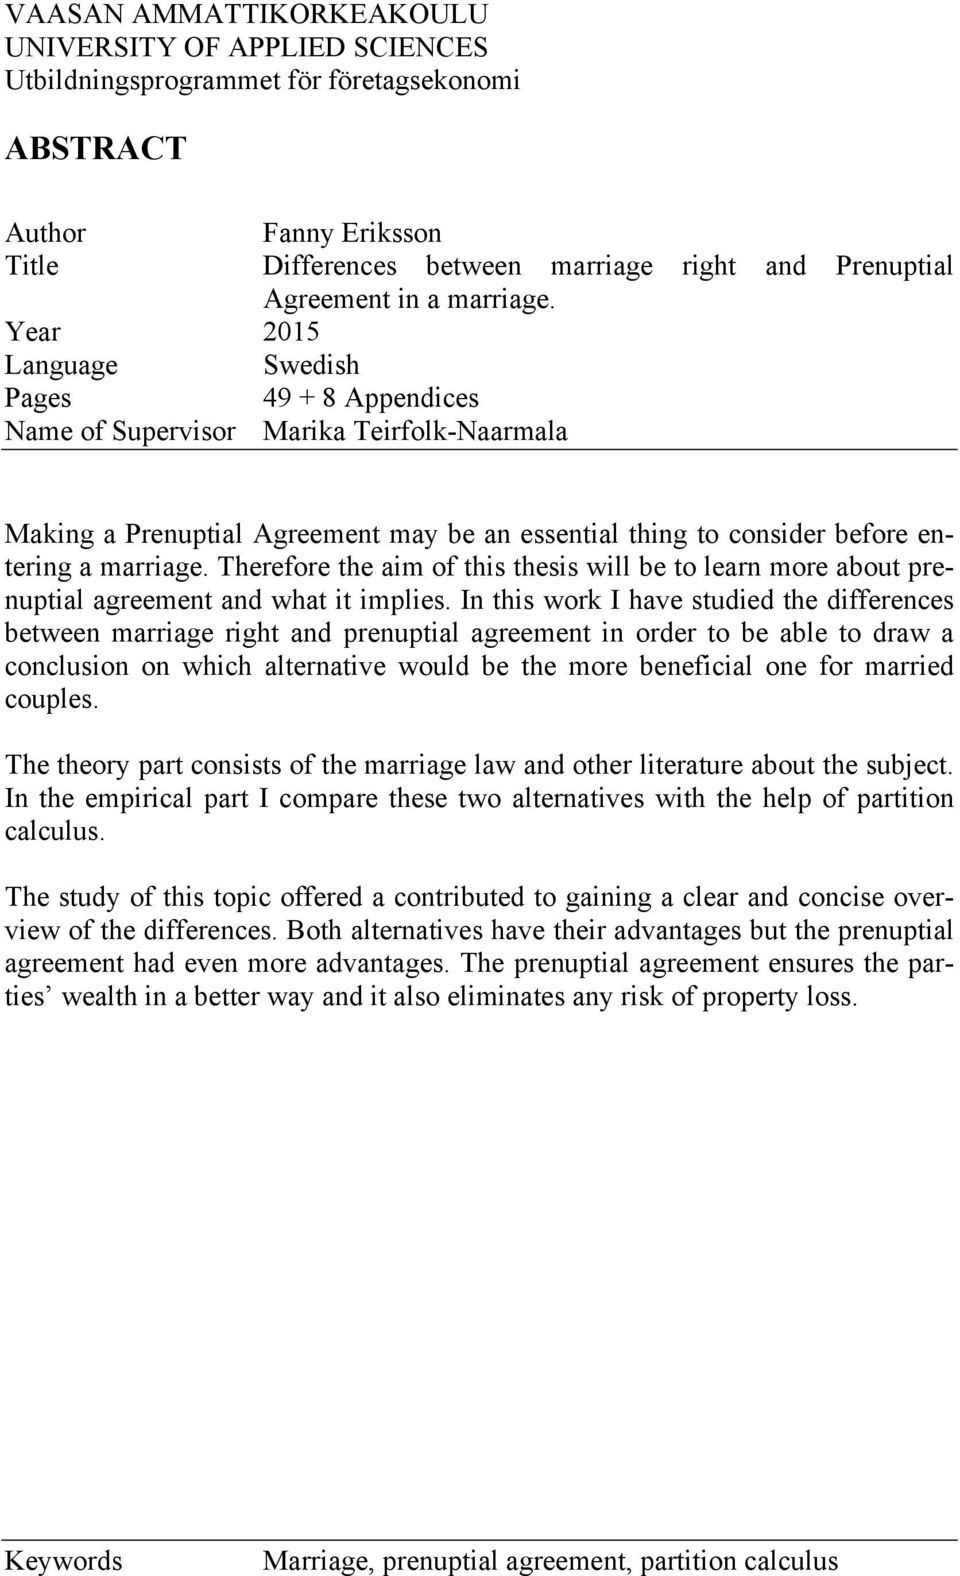 Year 2015 Language Swedish Pages 49 + 8 Appendices Name of Supervisor Marika Teirfolk-Naarmala Making a Prenuptial Agreement may be an essential thing to consider before entering  Therefore the aim